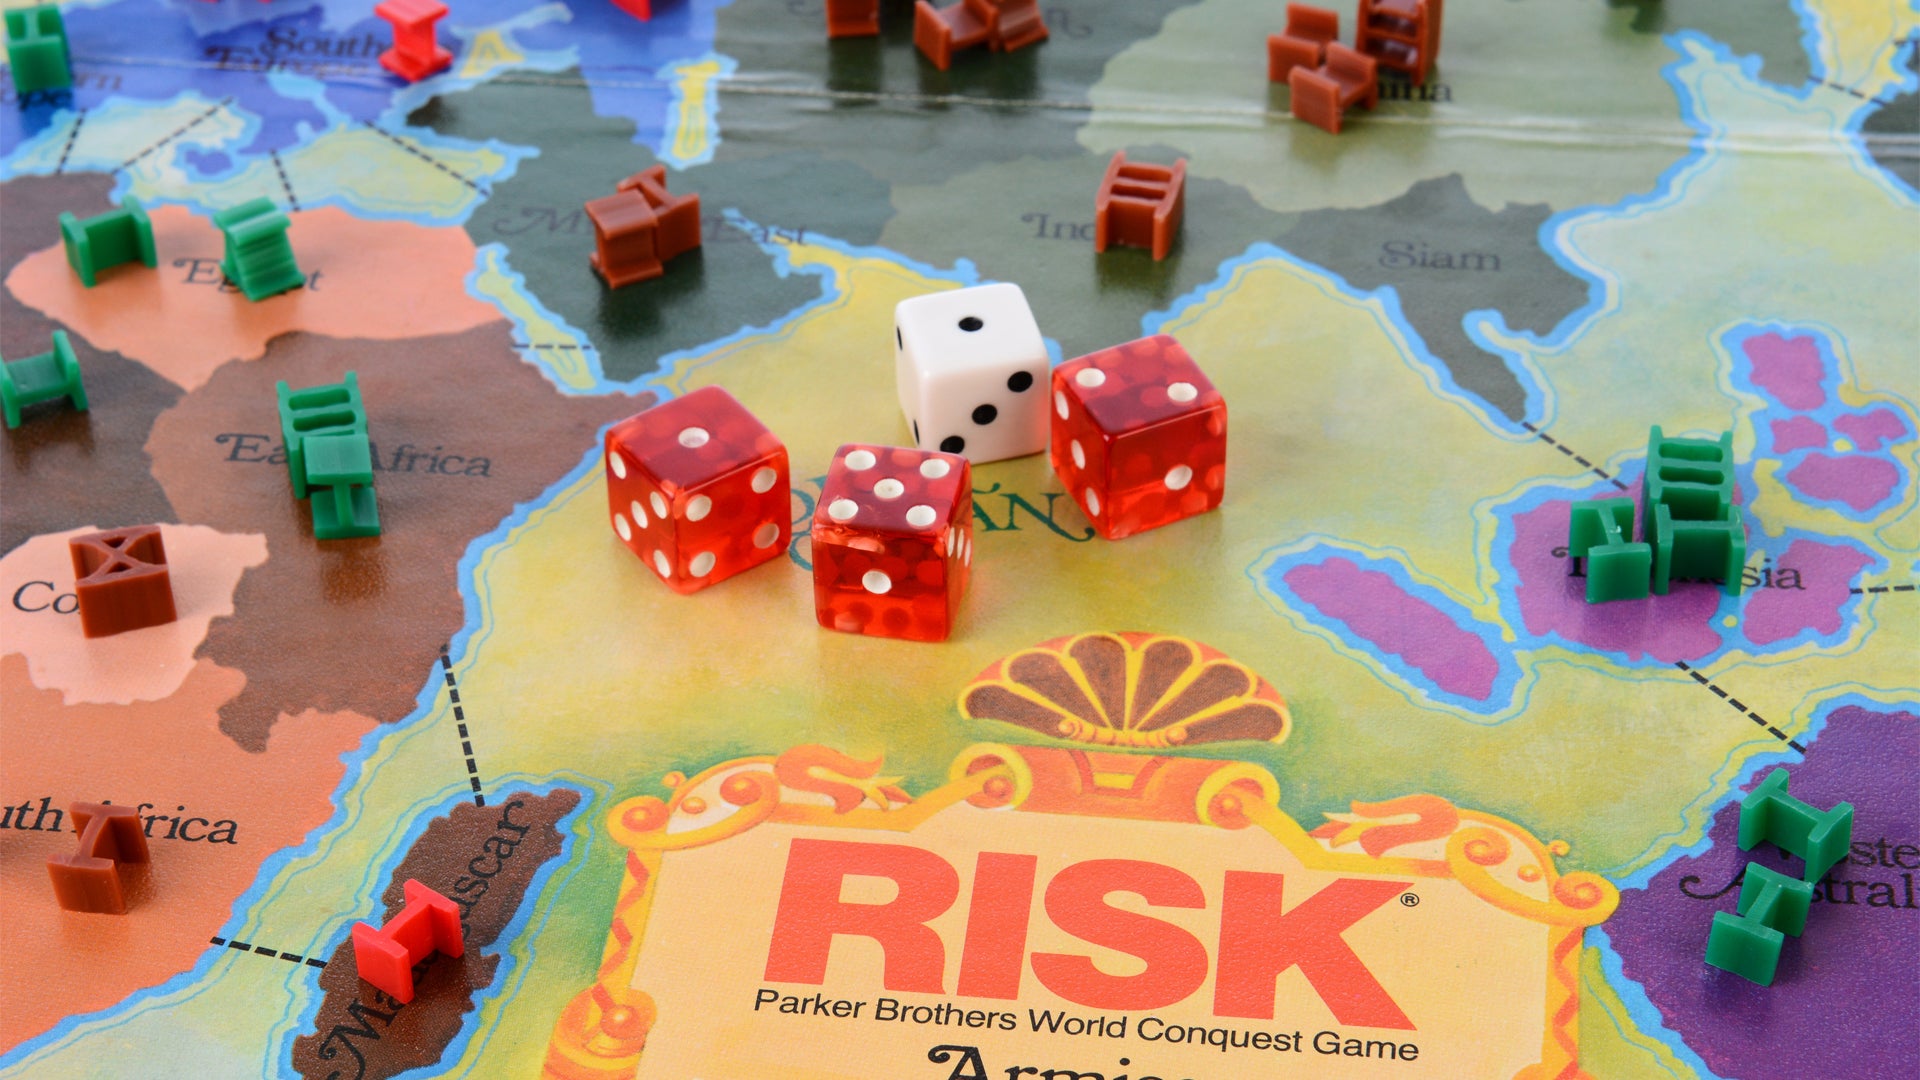 Image for How to play Risk: board game’s rules, setup and how to win